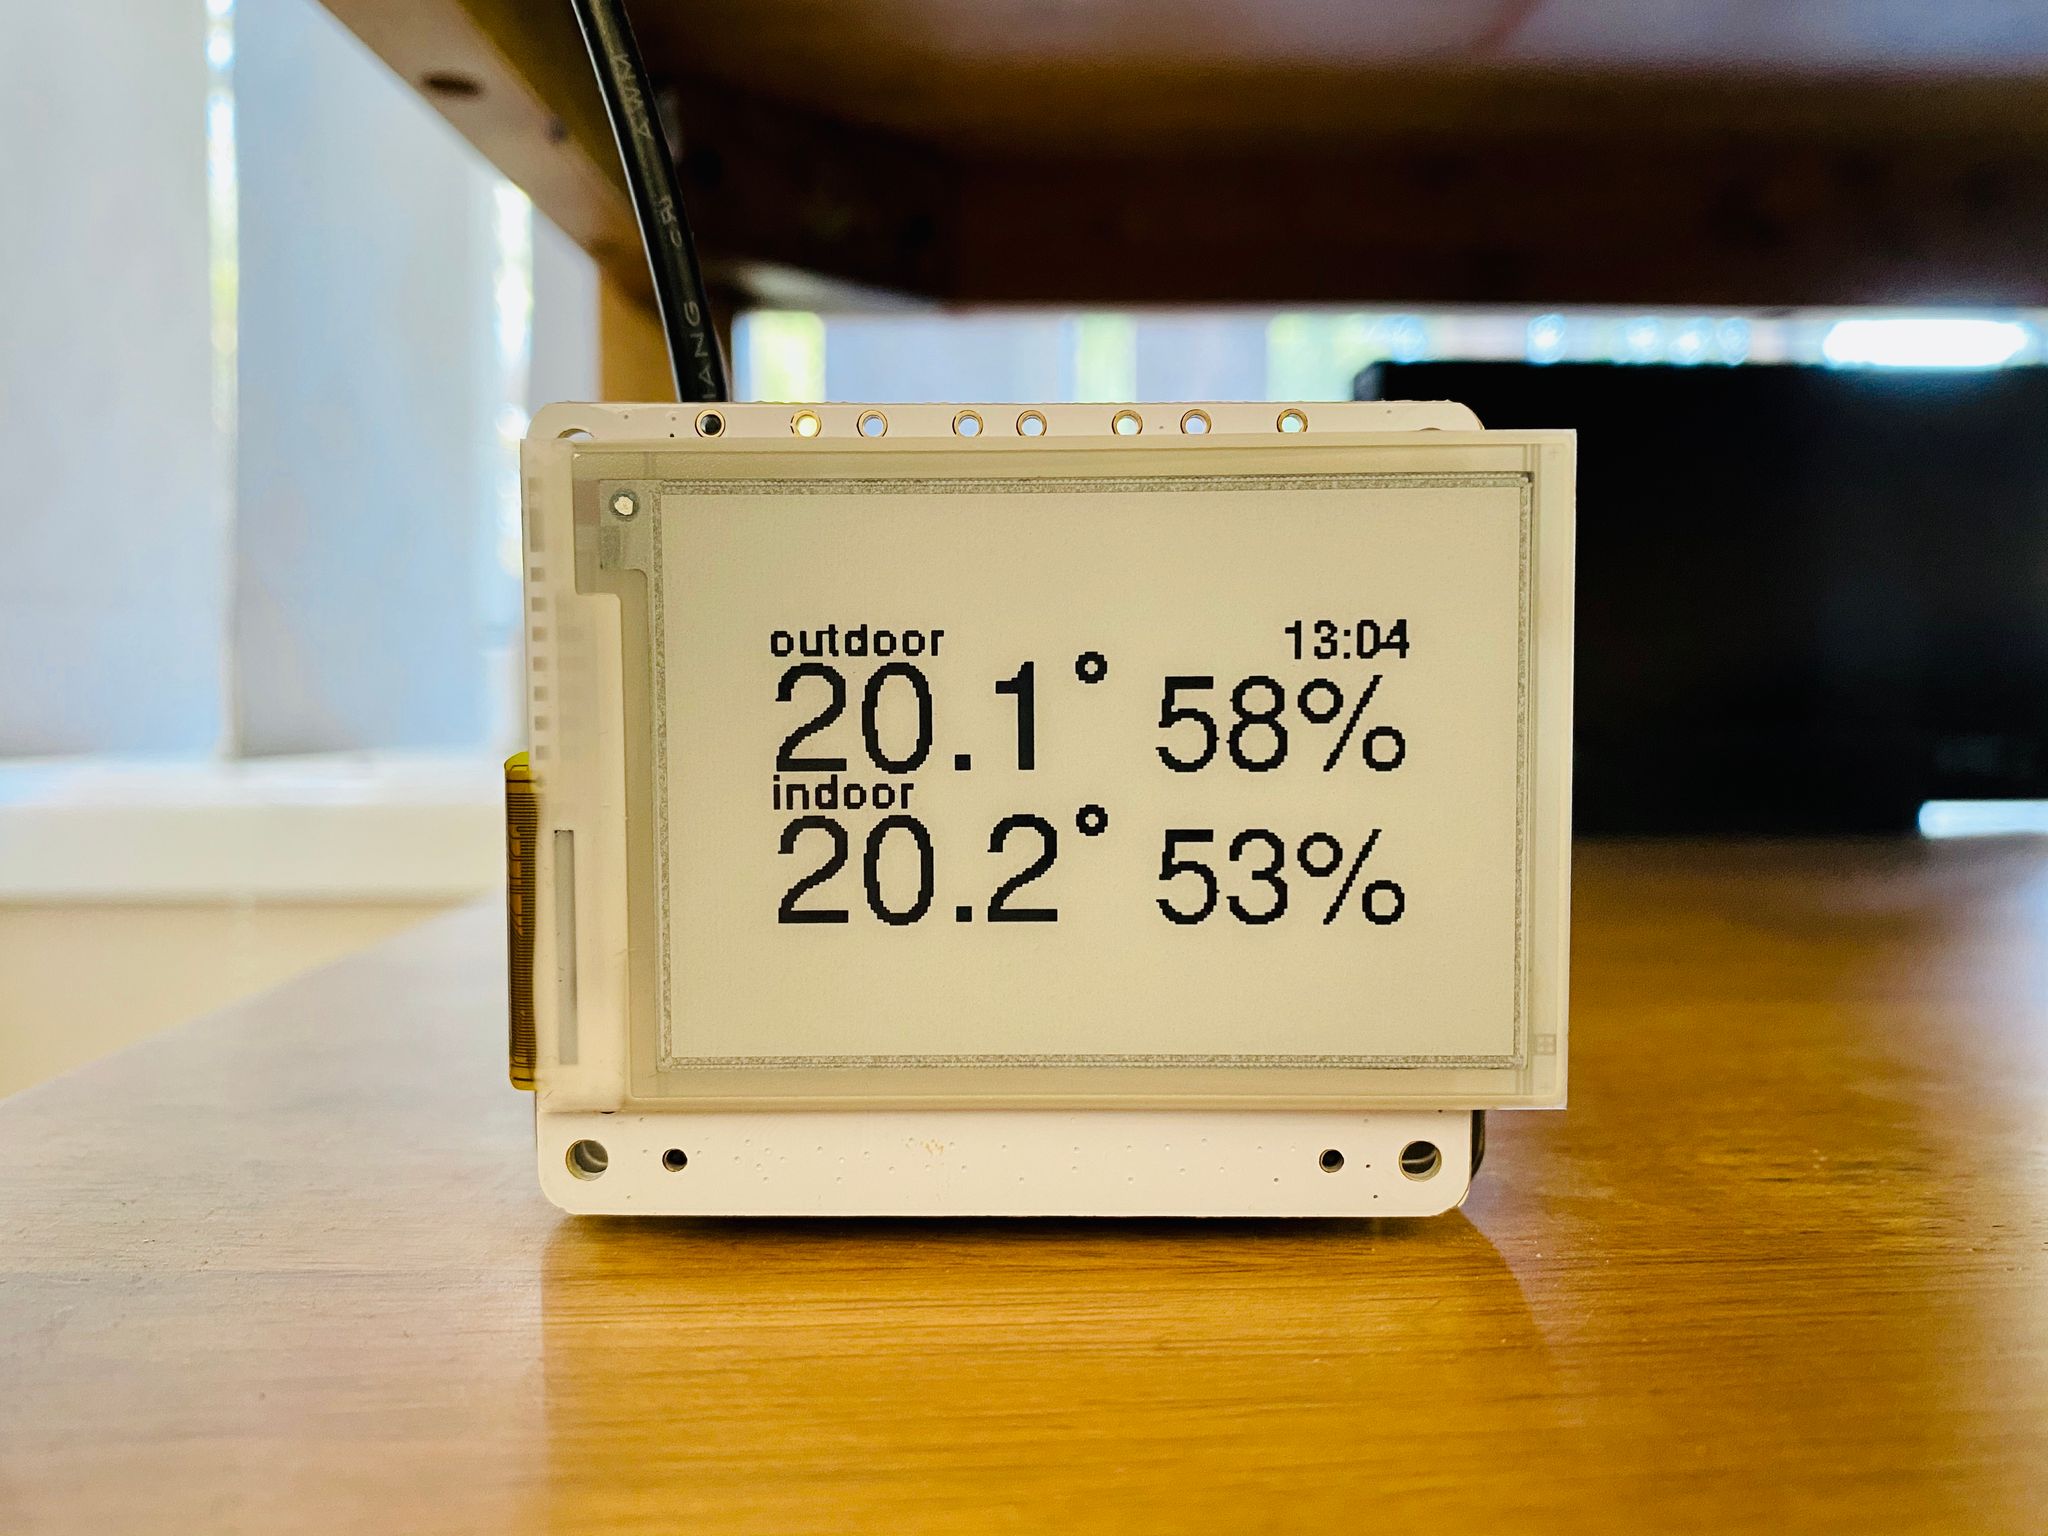 A photo of a small e-ink display showing indoor and outdoor temperature and humidity, but the information is sized for the old 2" display and it looks very silly now.